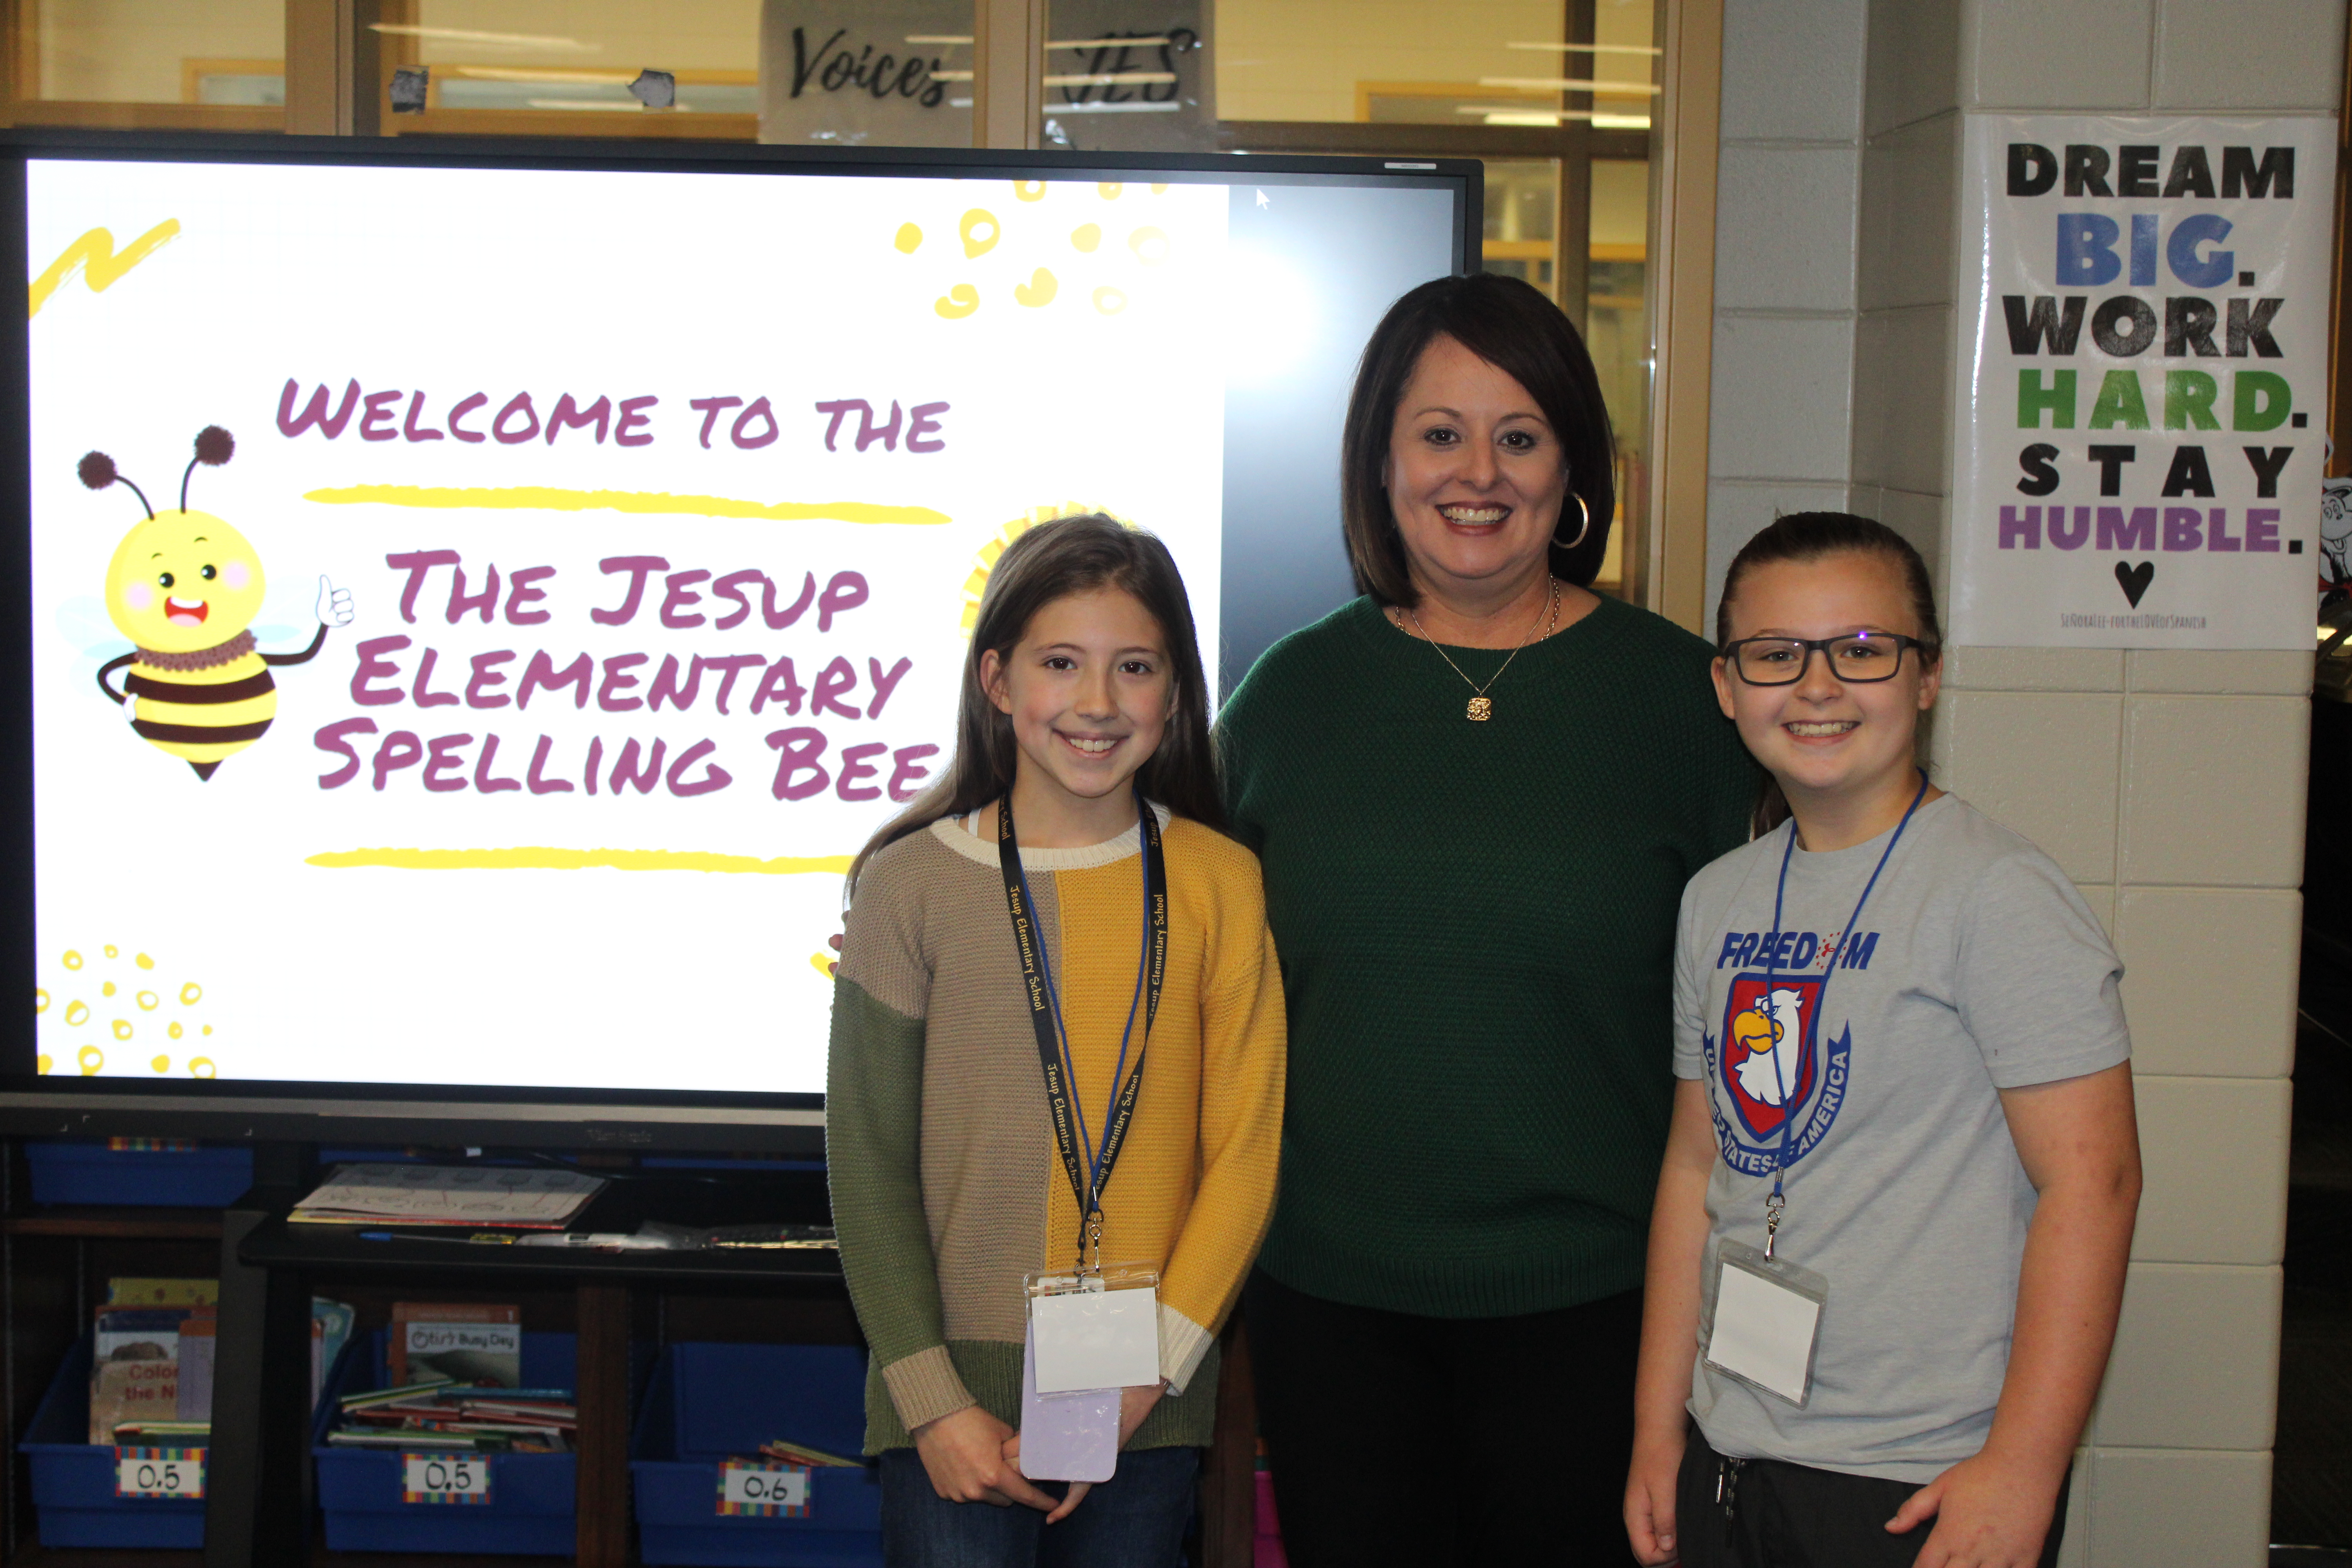 Principal Ogden with spelling bee winner and alternate